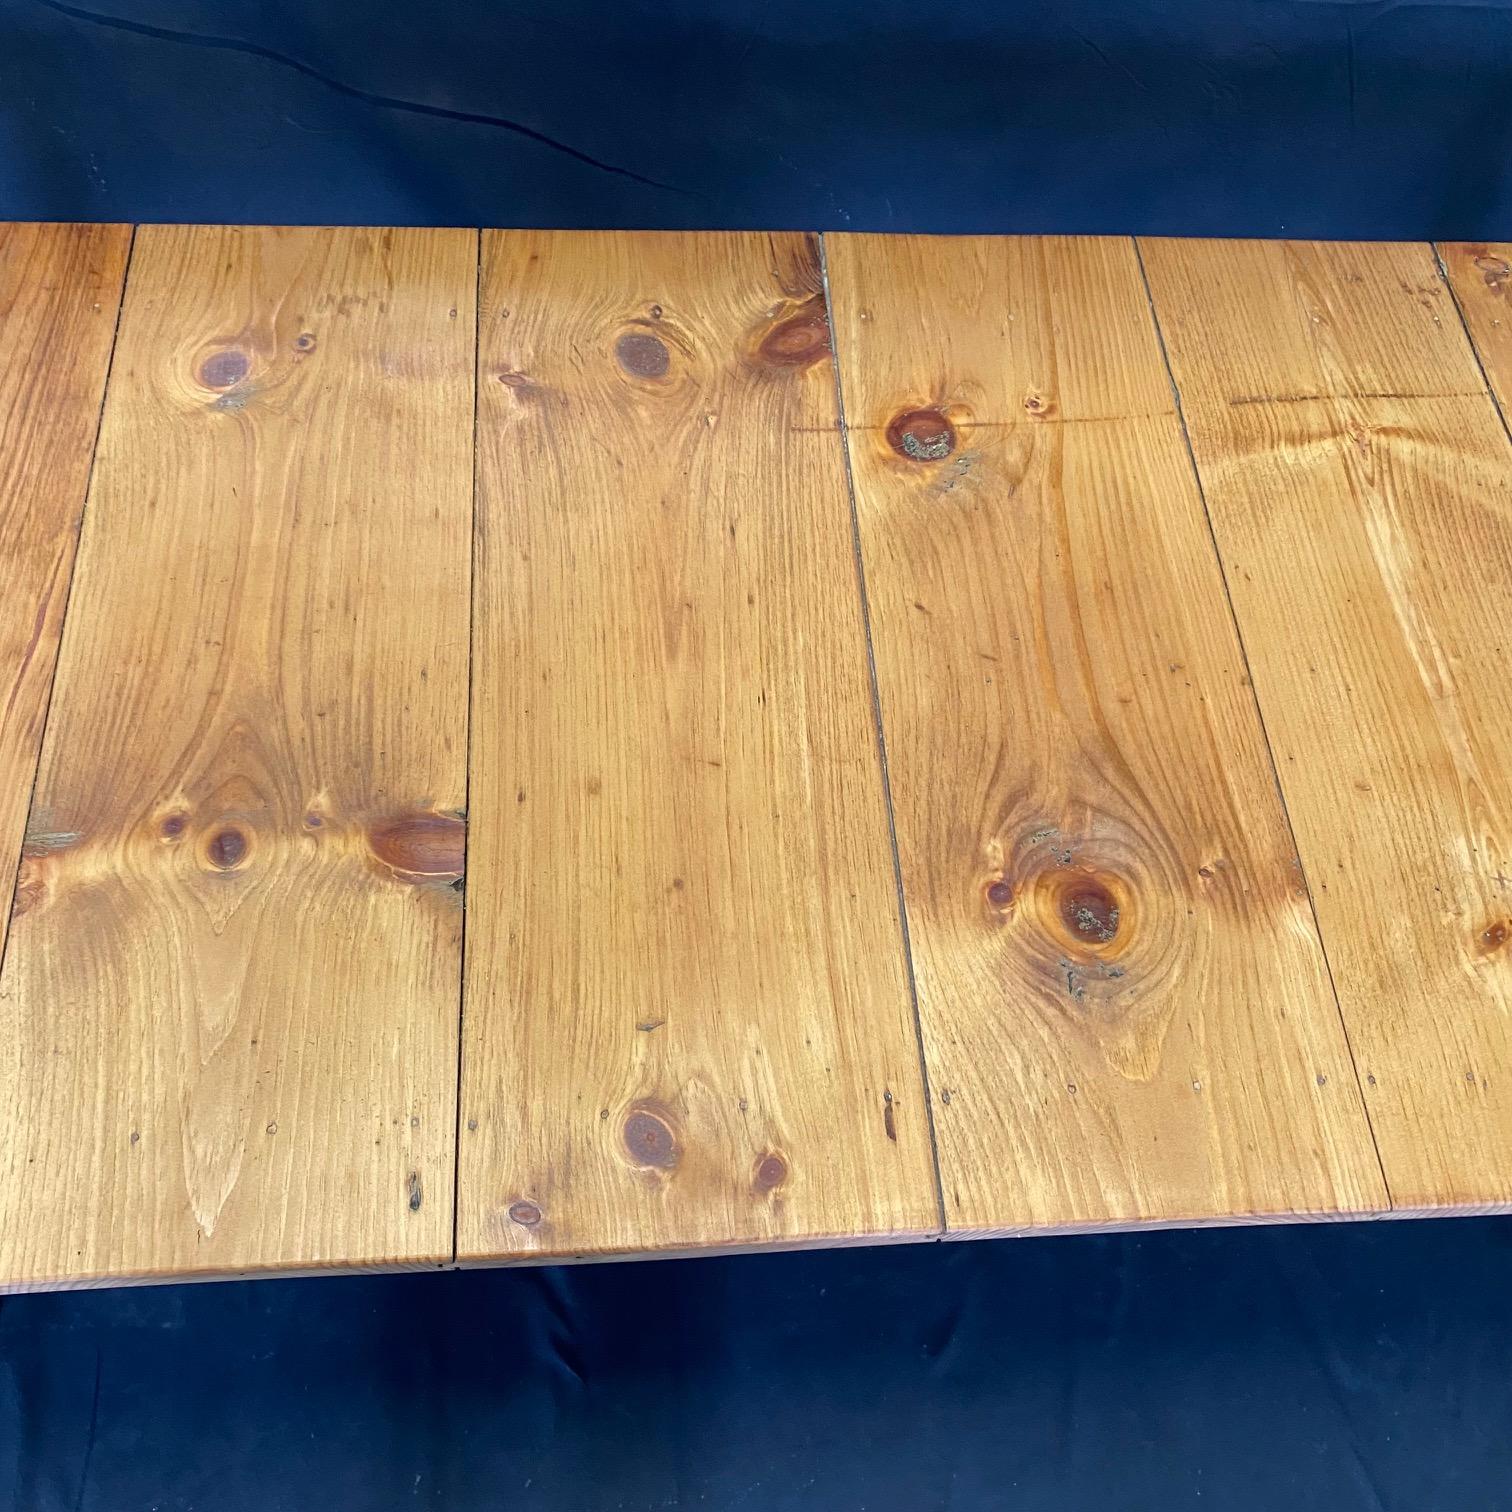 Classic Primitive style dining table in the farmhouse style is from an early Grange in Maine. Used since the 1800s to hold town meetings, it has been restored beautifully, yet retains its original paint on the body. All legs can be released and fold